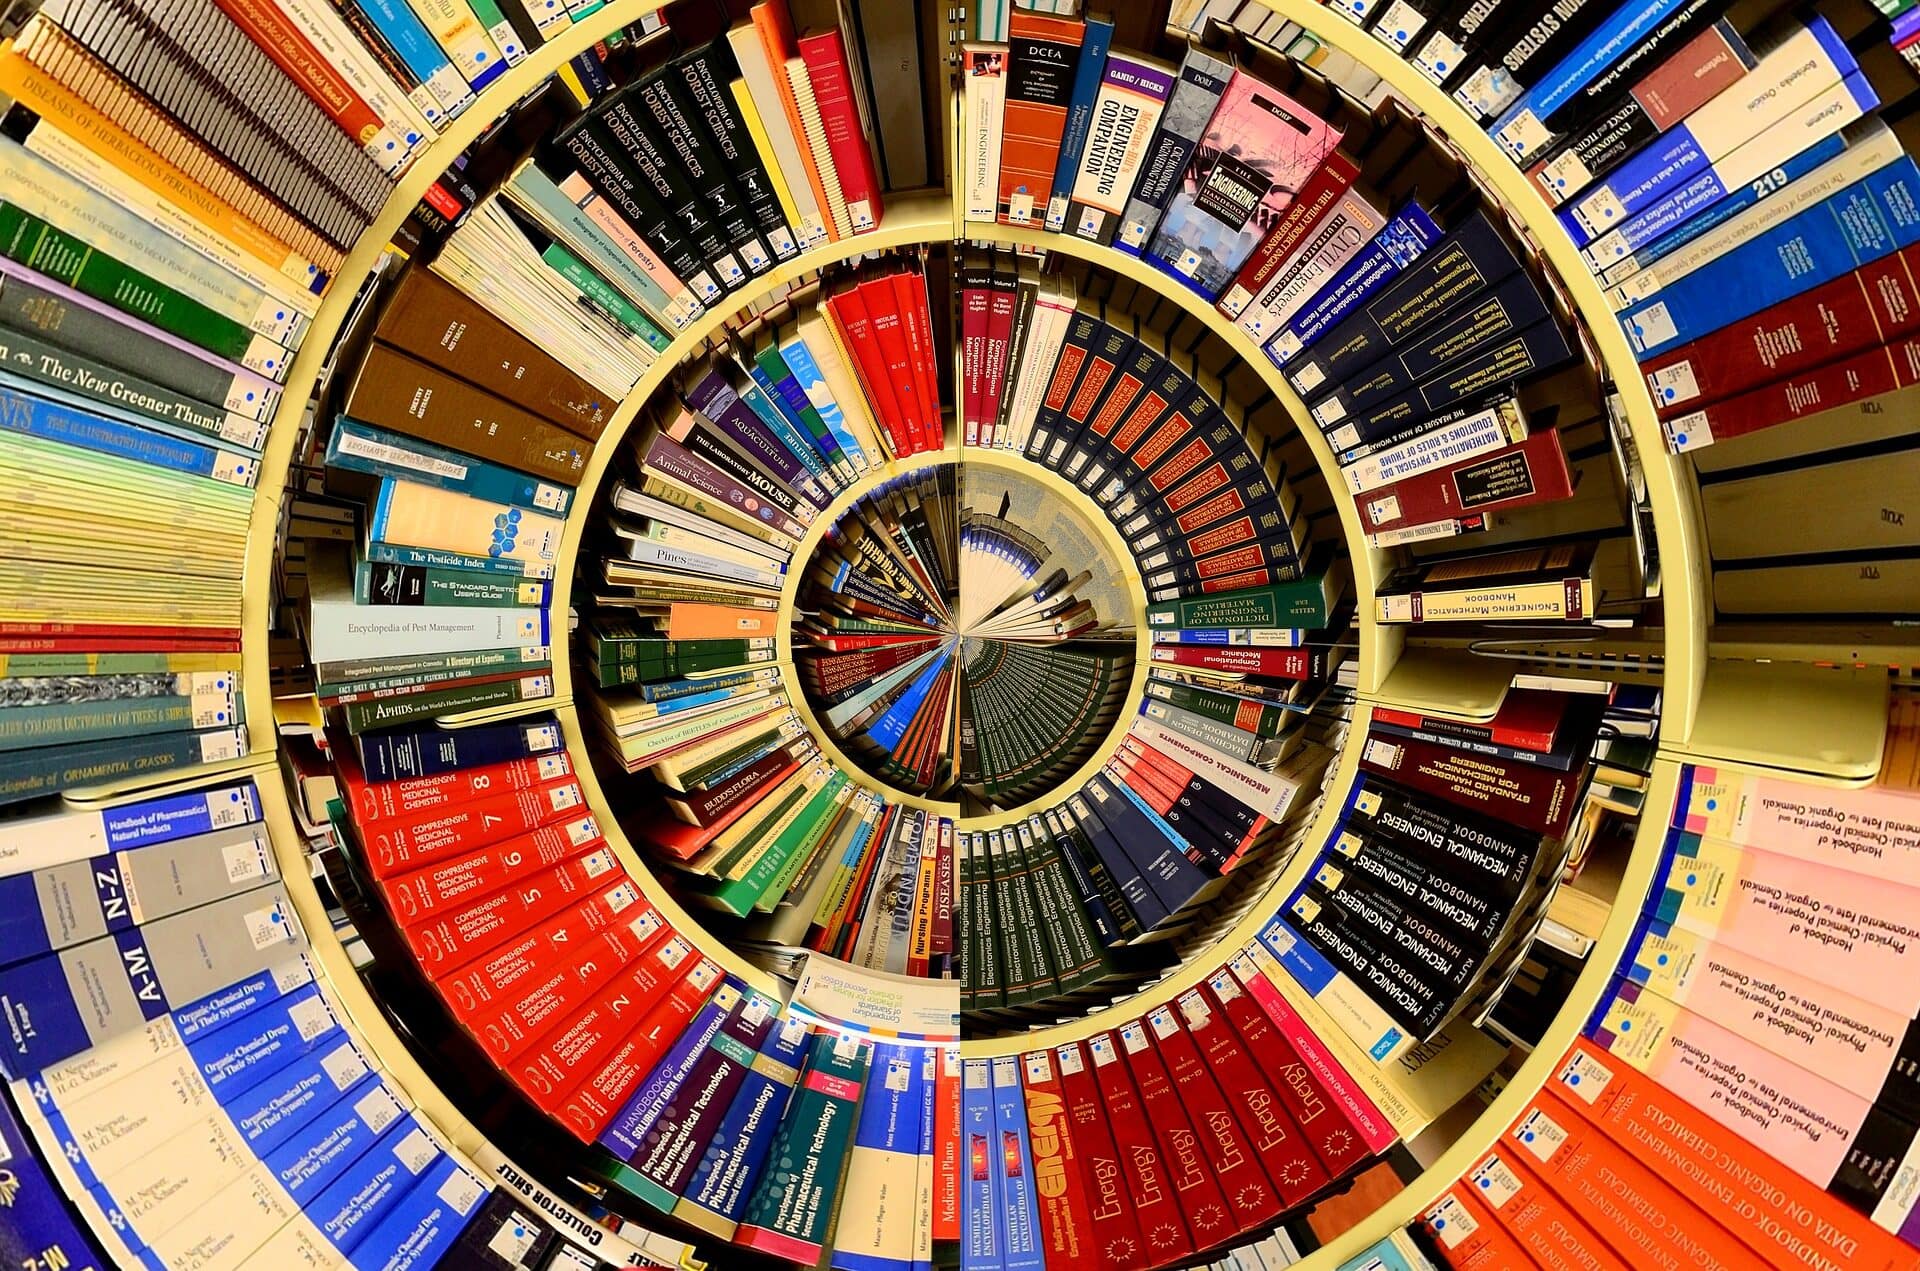 Image: Shelves of library books manipulated into concentric circles, giving the allusion of algorithms.